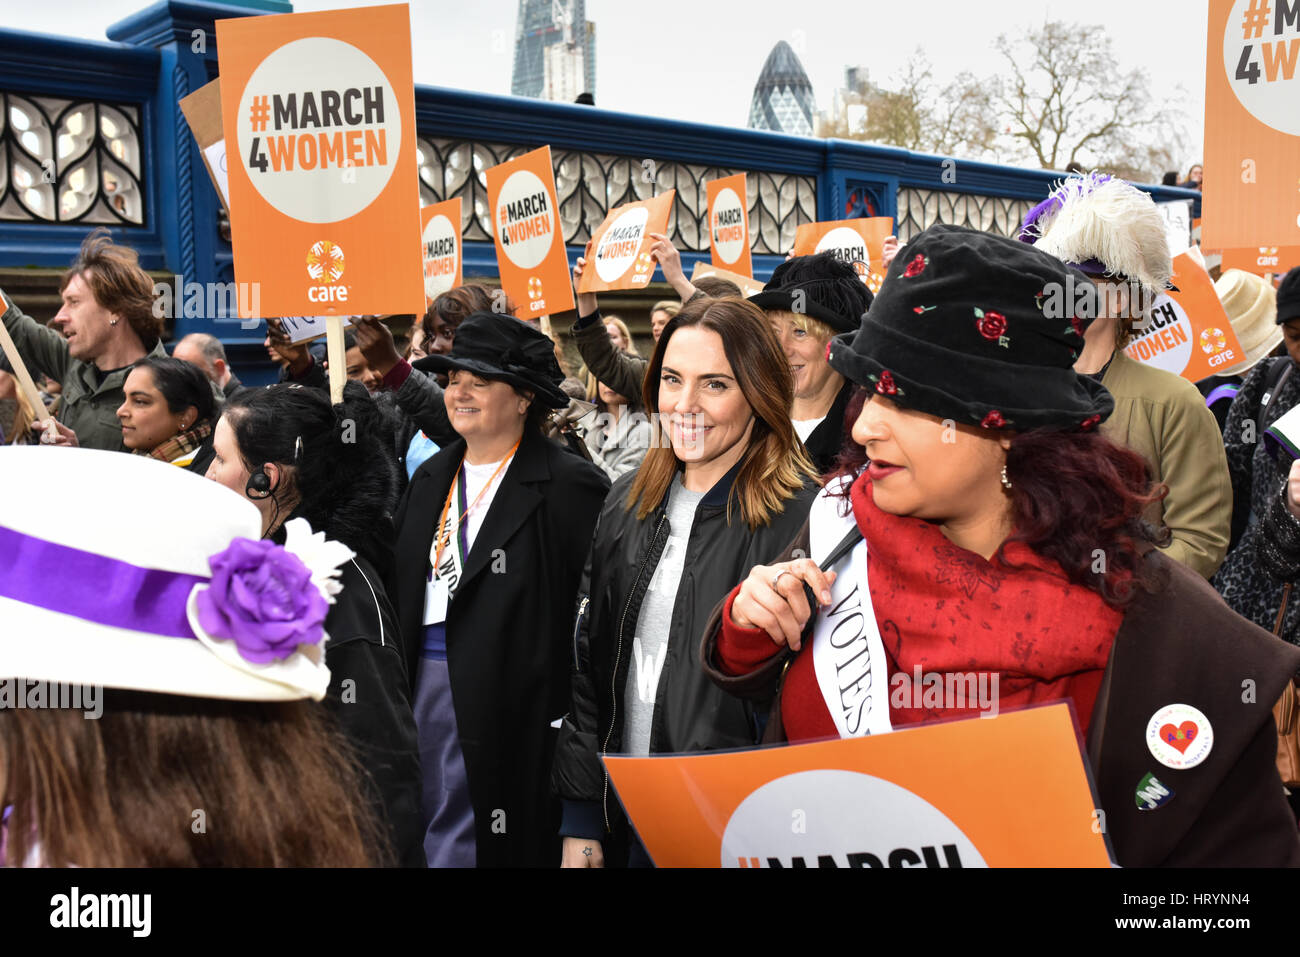 London, UK. 5th Mar, 2017. Melanie C at Care International's March for Women. Hundreds gathered outside London City Hall, including Annie Lennox and London Mayor Sadiq Khan, to march across Tower Bridge for women's rights and equality. Credit: Jacob Sacks-Jones/Alamy Live News. Stock Photo